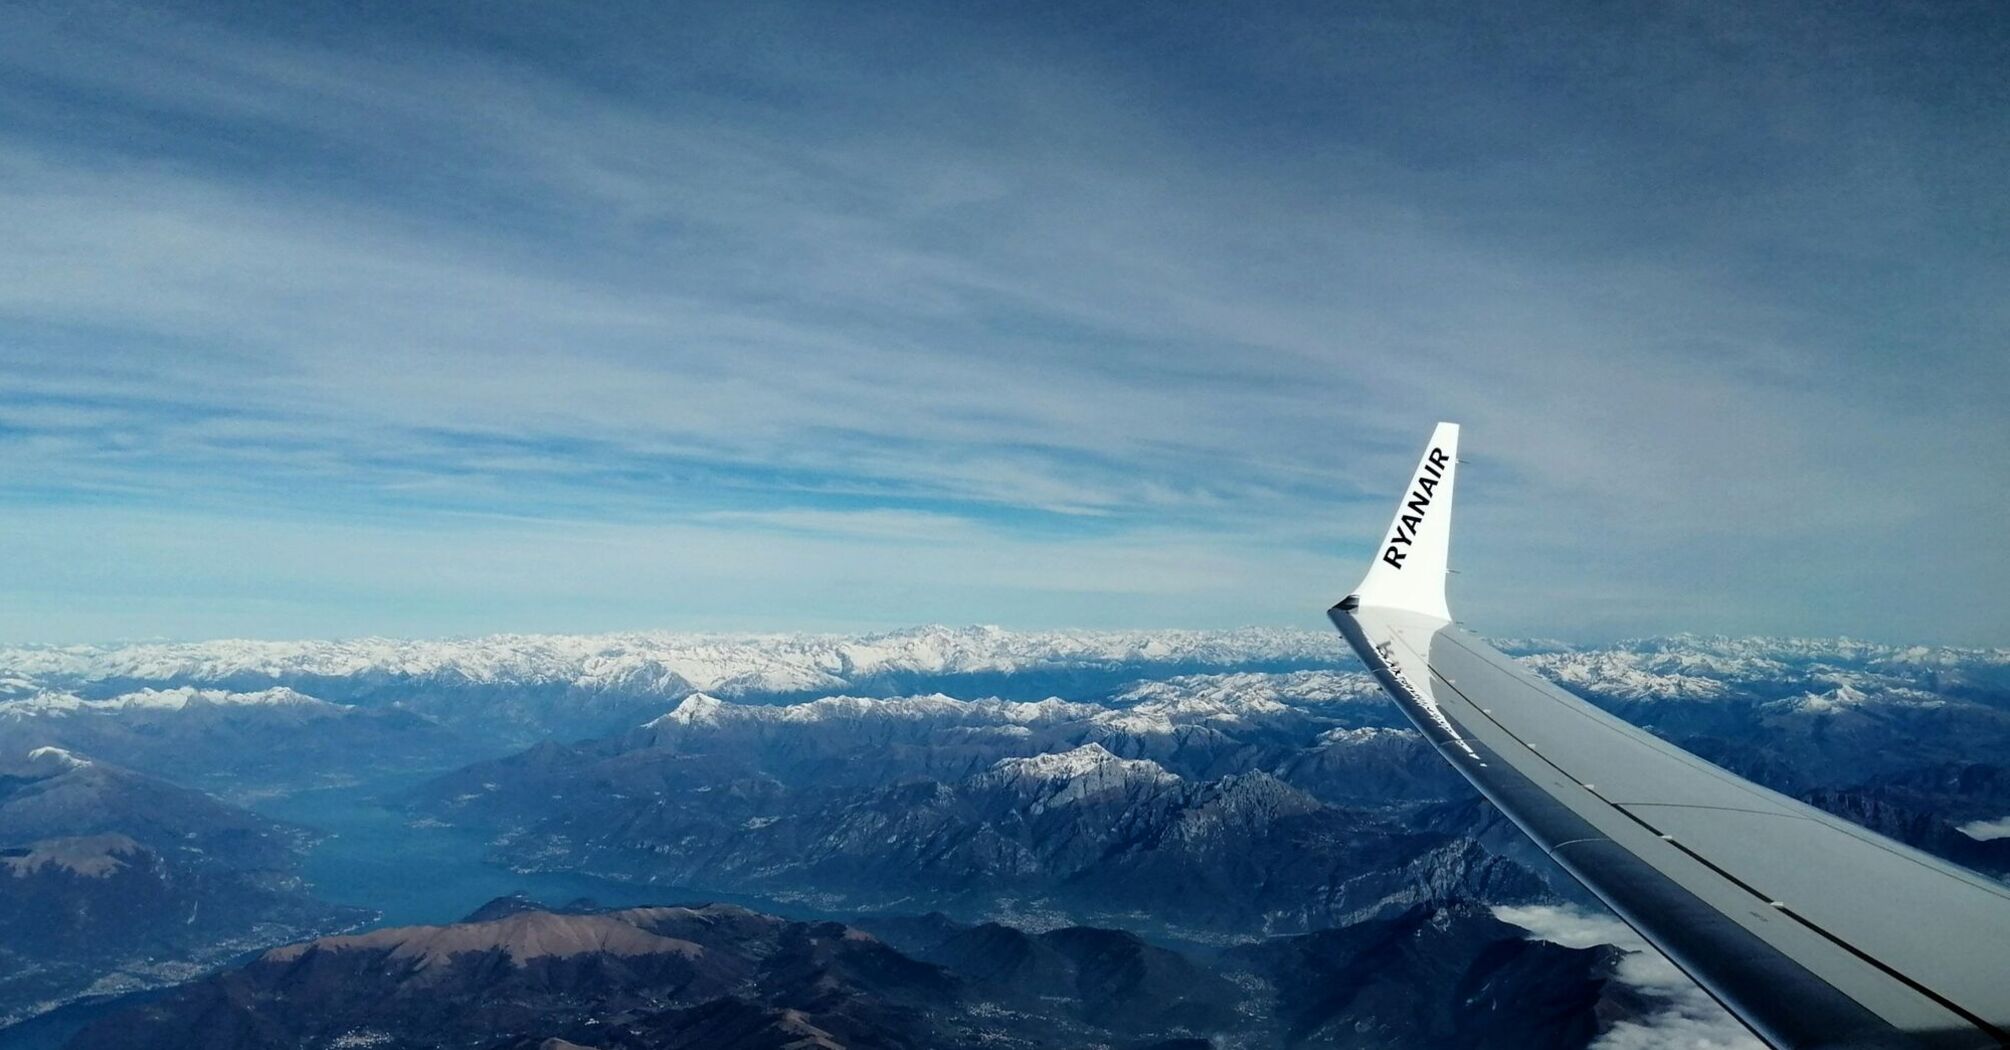 View from a Ryanair airplane window over mountains